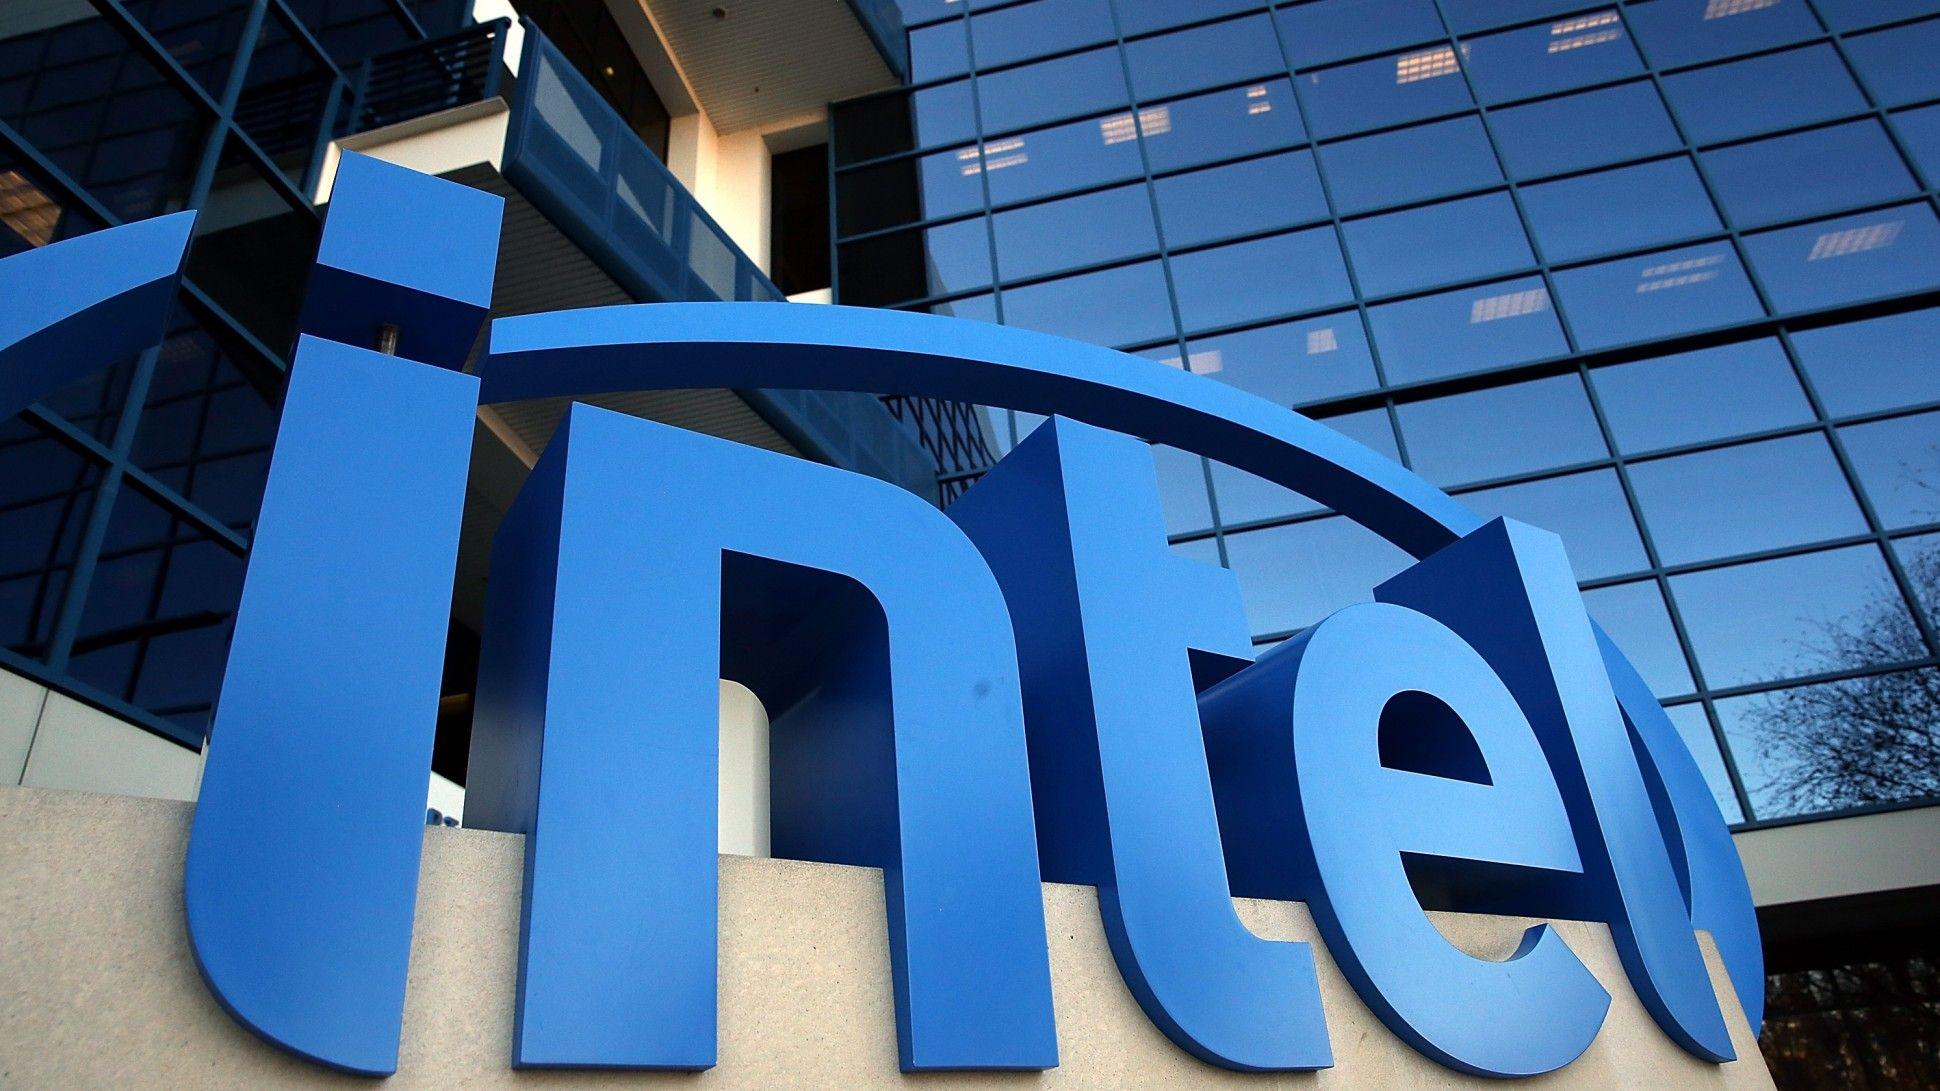 Building with Old Intel Logo - Intel Alert: Chip Maker Patches a Nine-Year-Old Security Bug Hidden ...